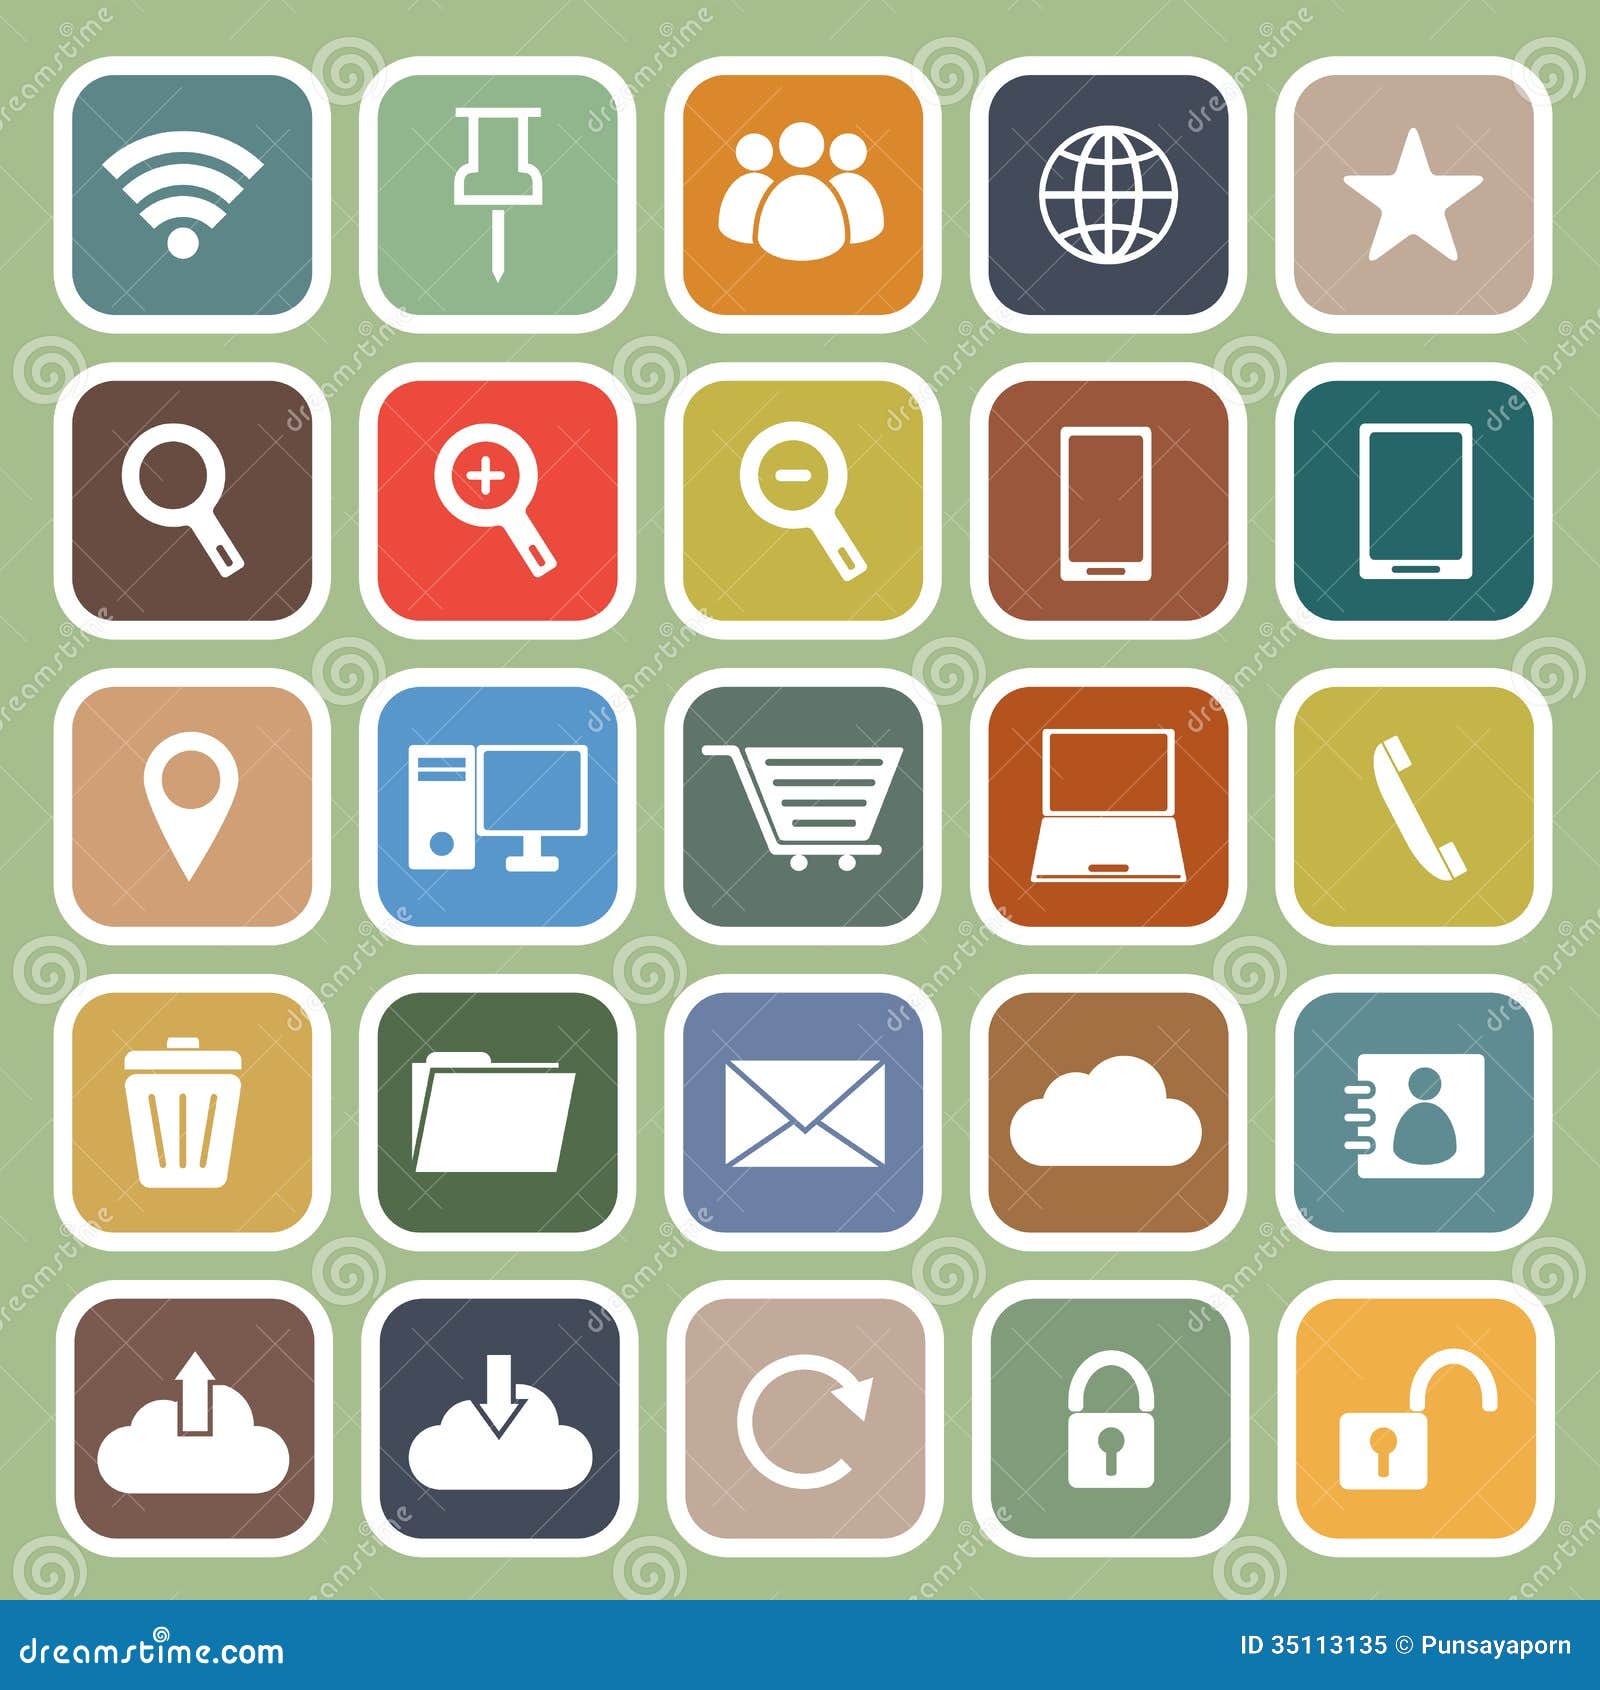 royalty free icons and clipart stock images - photo #30